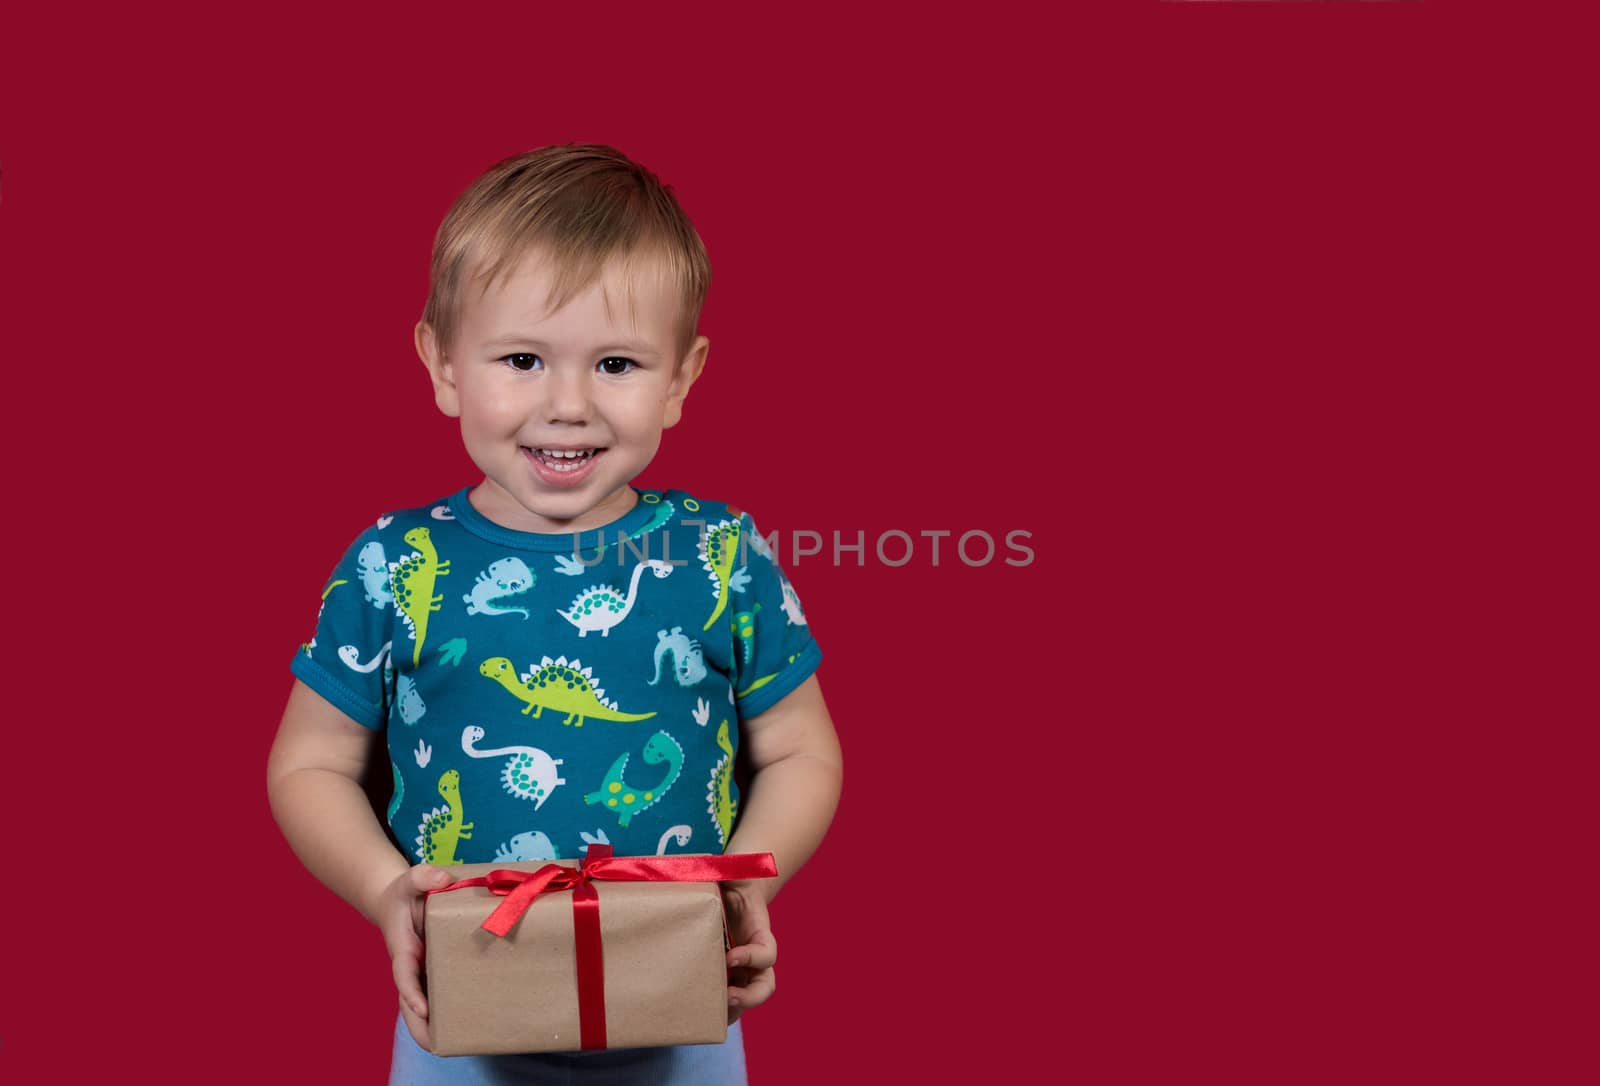 A little boy tries to unpack a New Year's gift with enthusiasm and excitement looking at the camera smiling on a red background